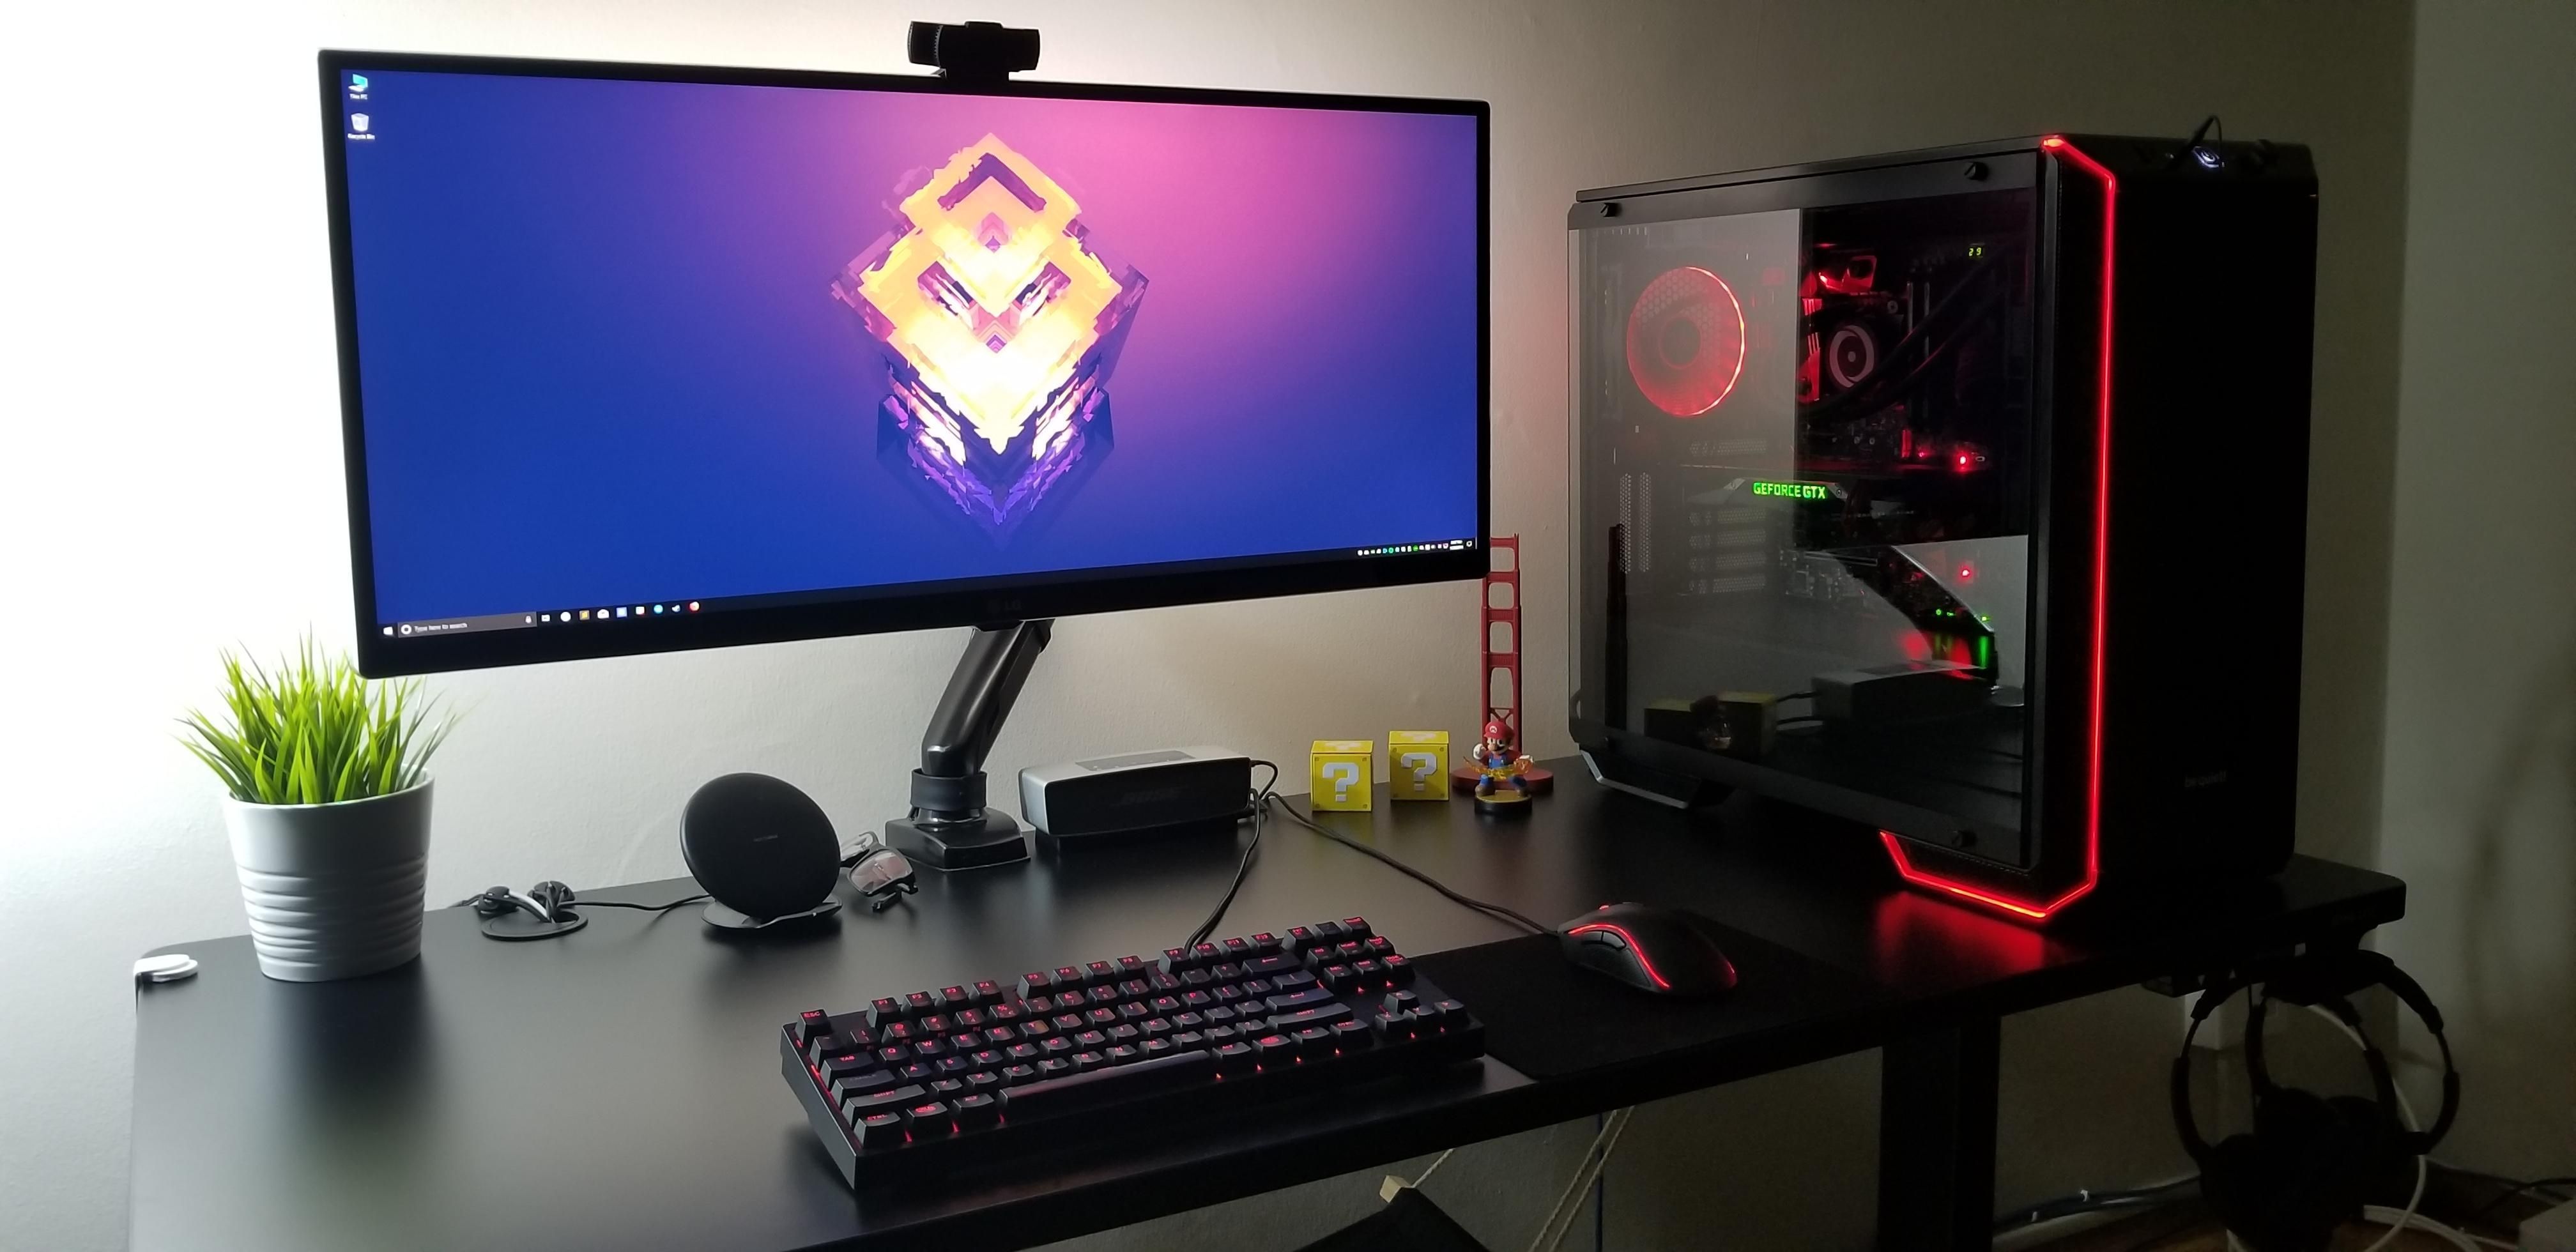 My battle station needs a simple black and red wallpaper